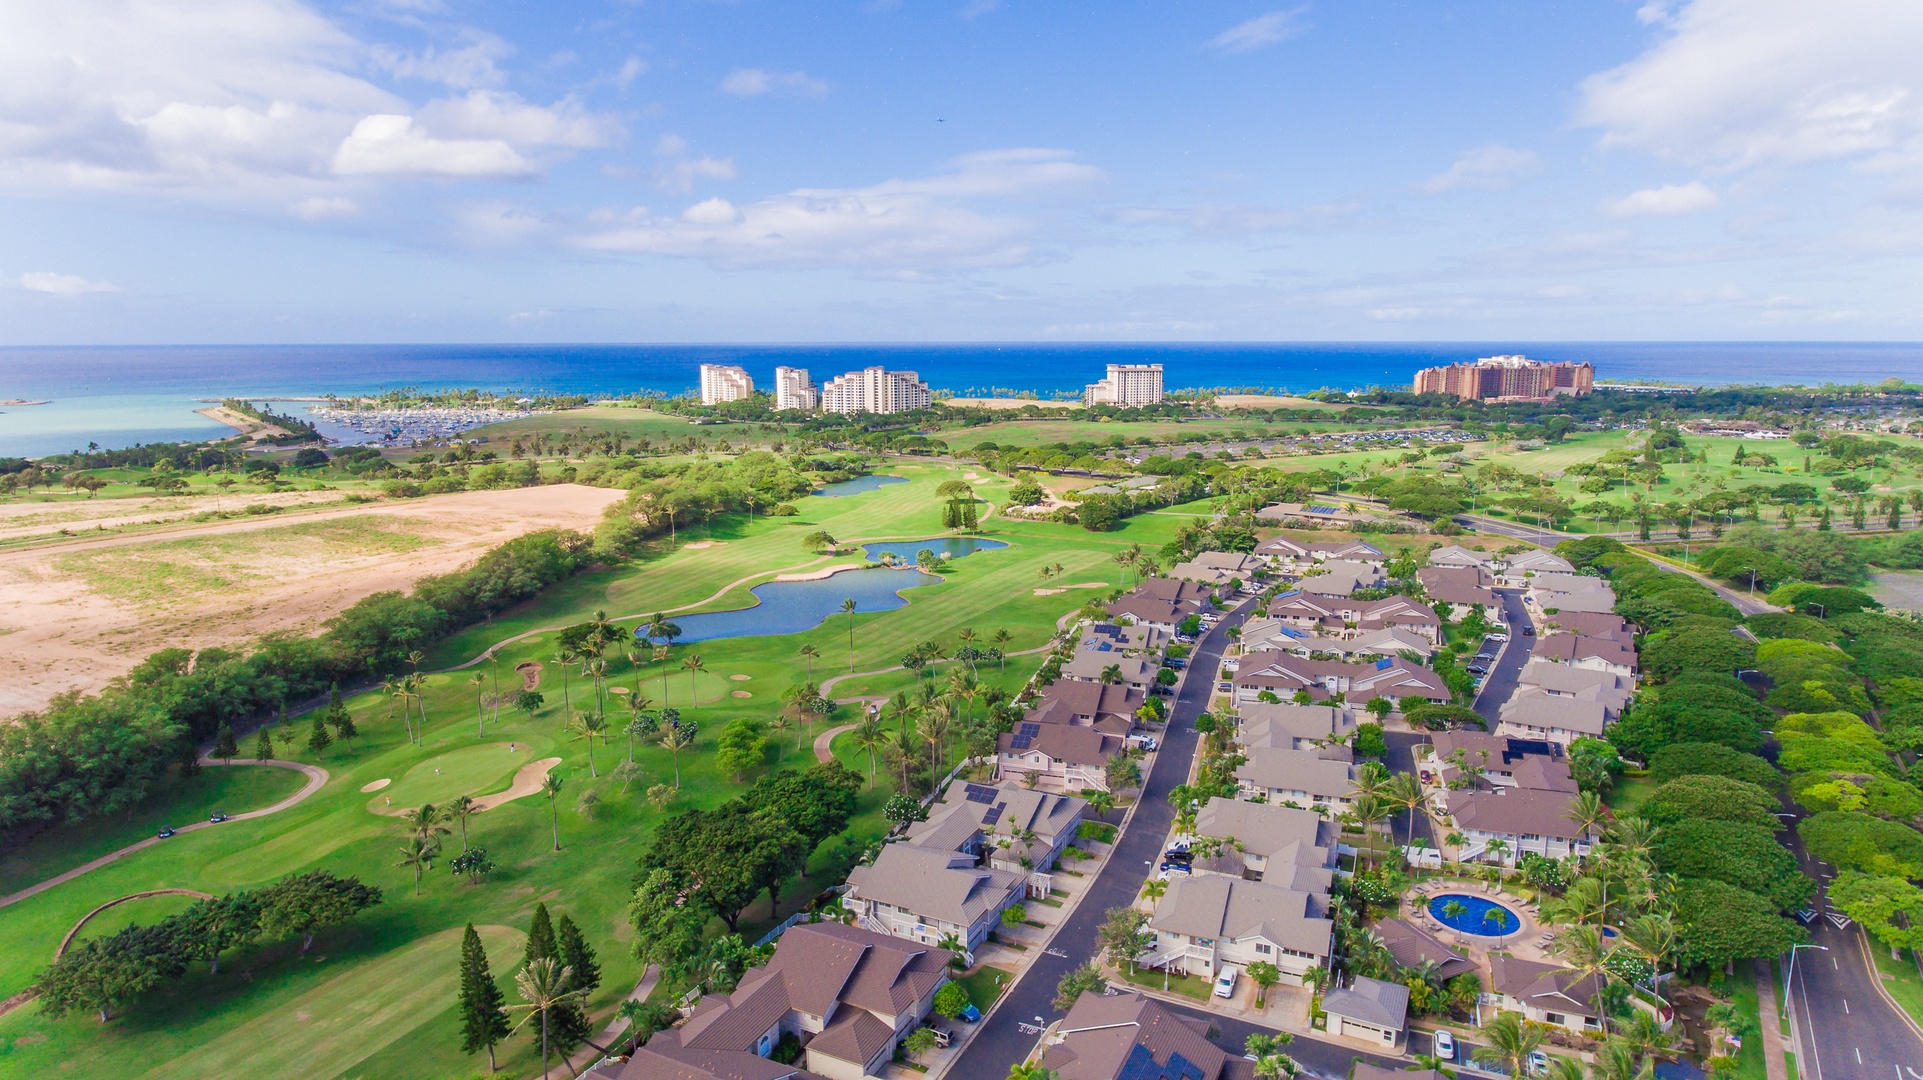 Kapolei Vacation Rentals, Kai Lani 12D - A picture showing the landscape of Hawaii.